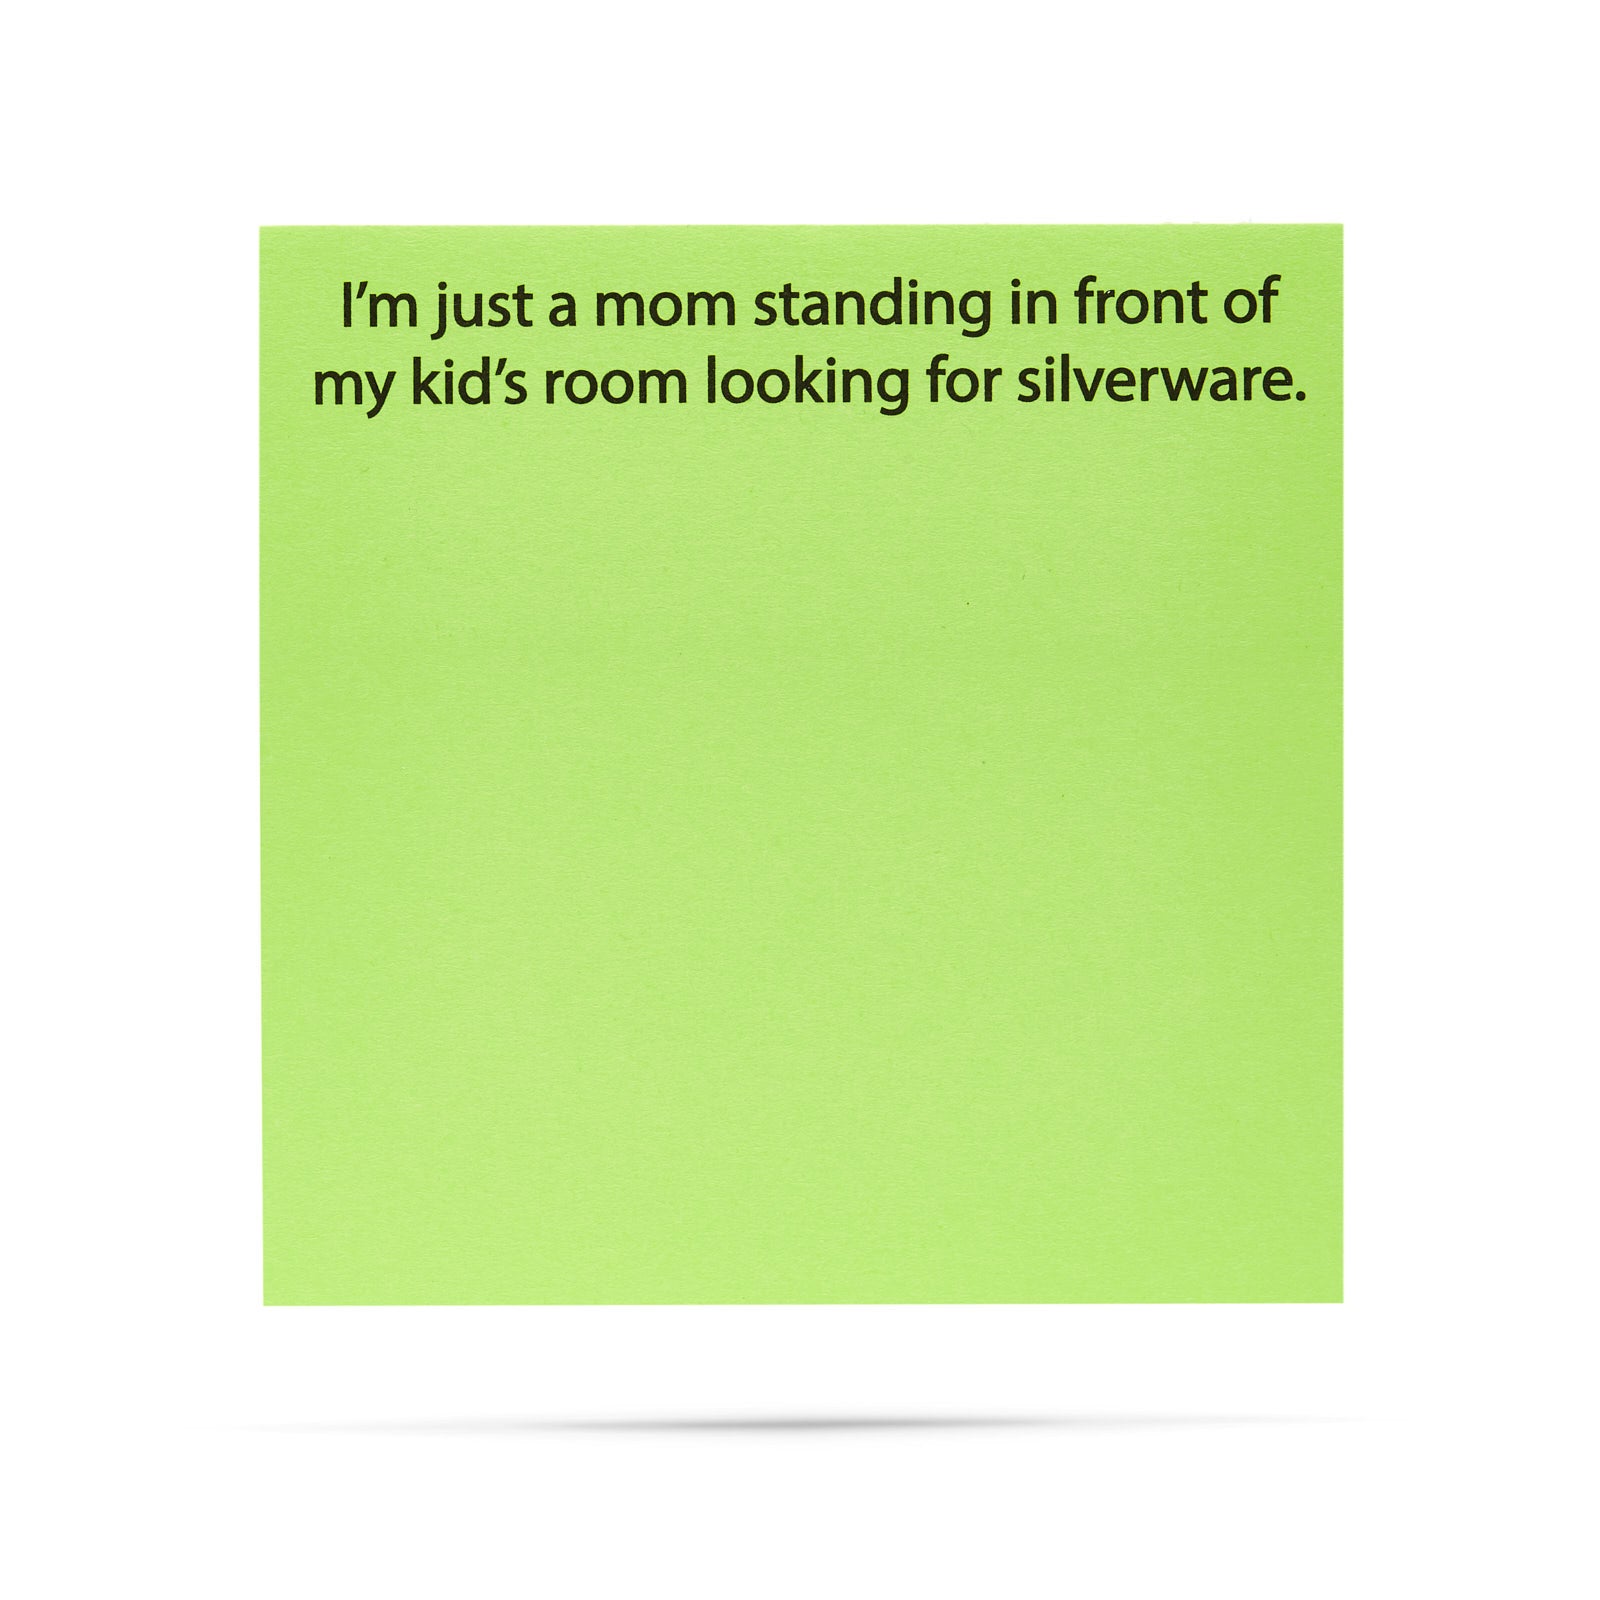 I'm just a mom standing in front of my kid's room looking for silverware 100 sheet sticky note pad